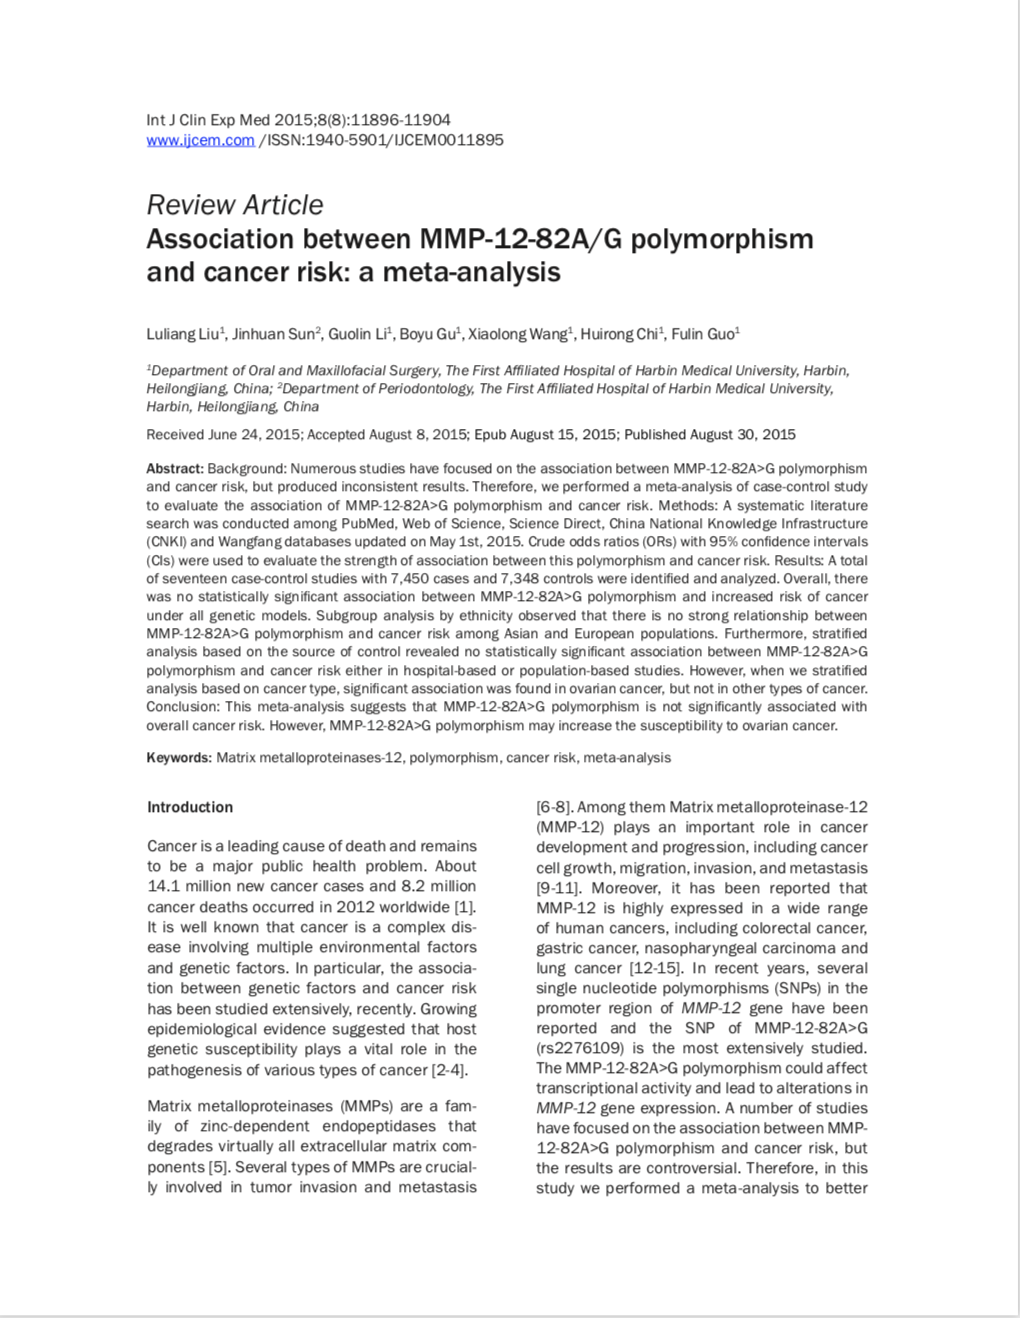 Association between MMP-12-82A/G polymorphism and cancer risk: a meta-analysis